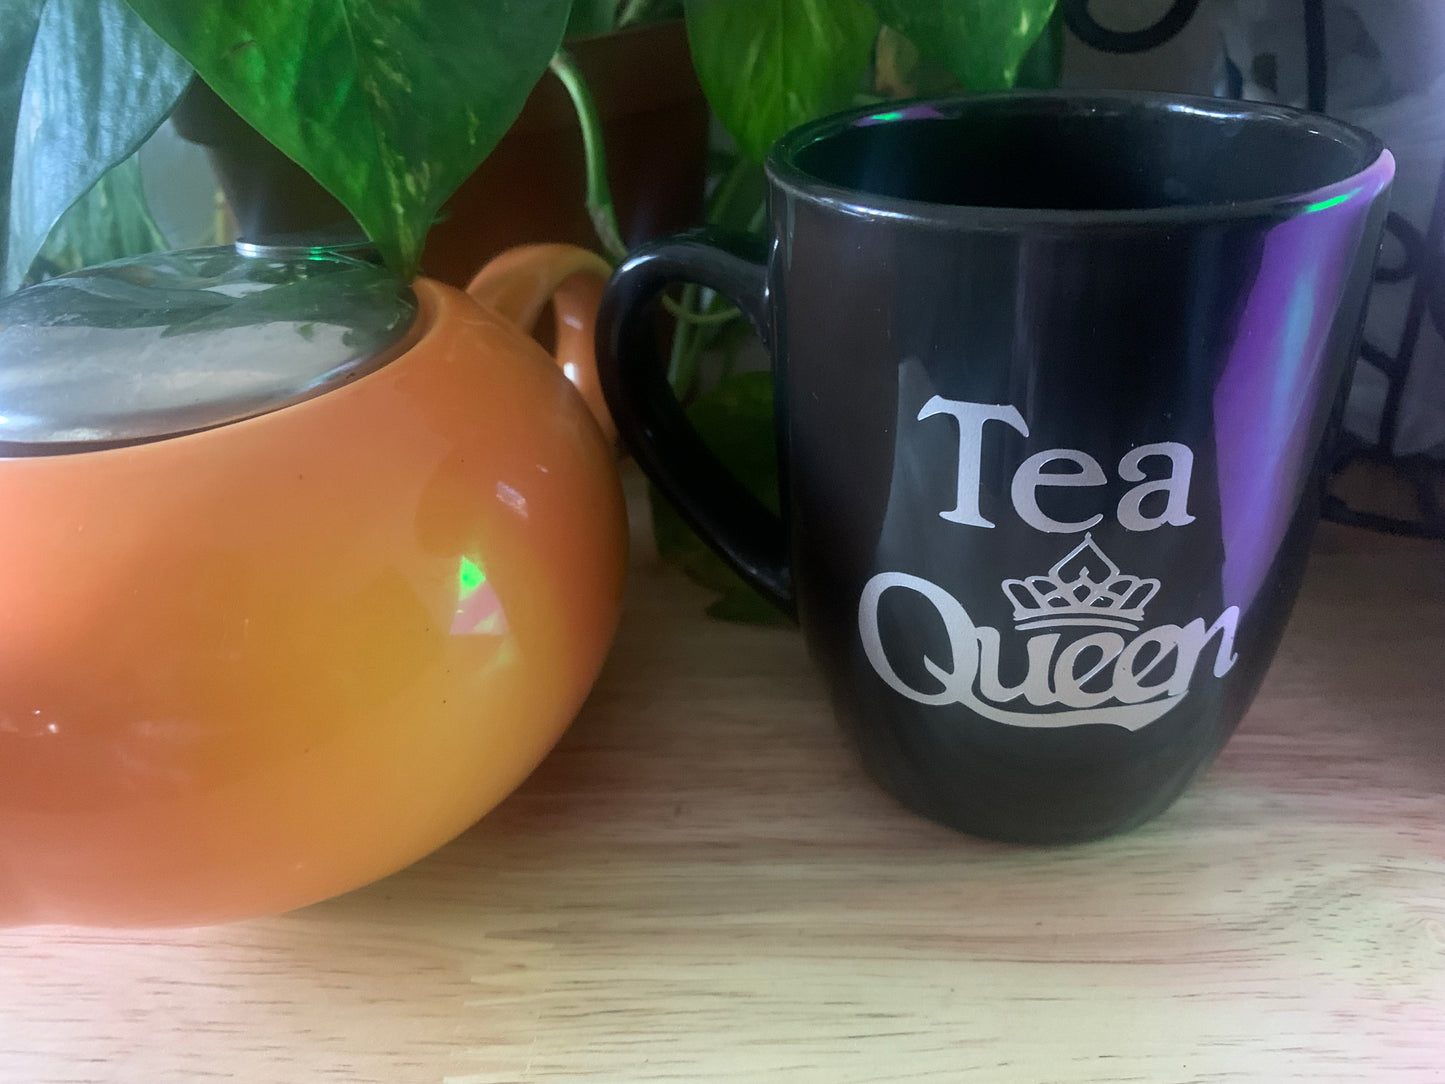 "Tea Queen" 4 different mood support teas by Yogi  and a 8oz mug